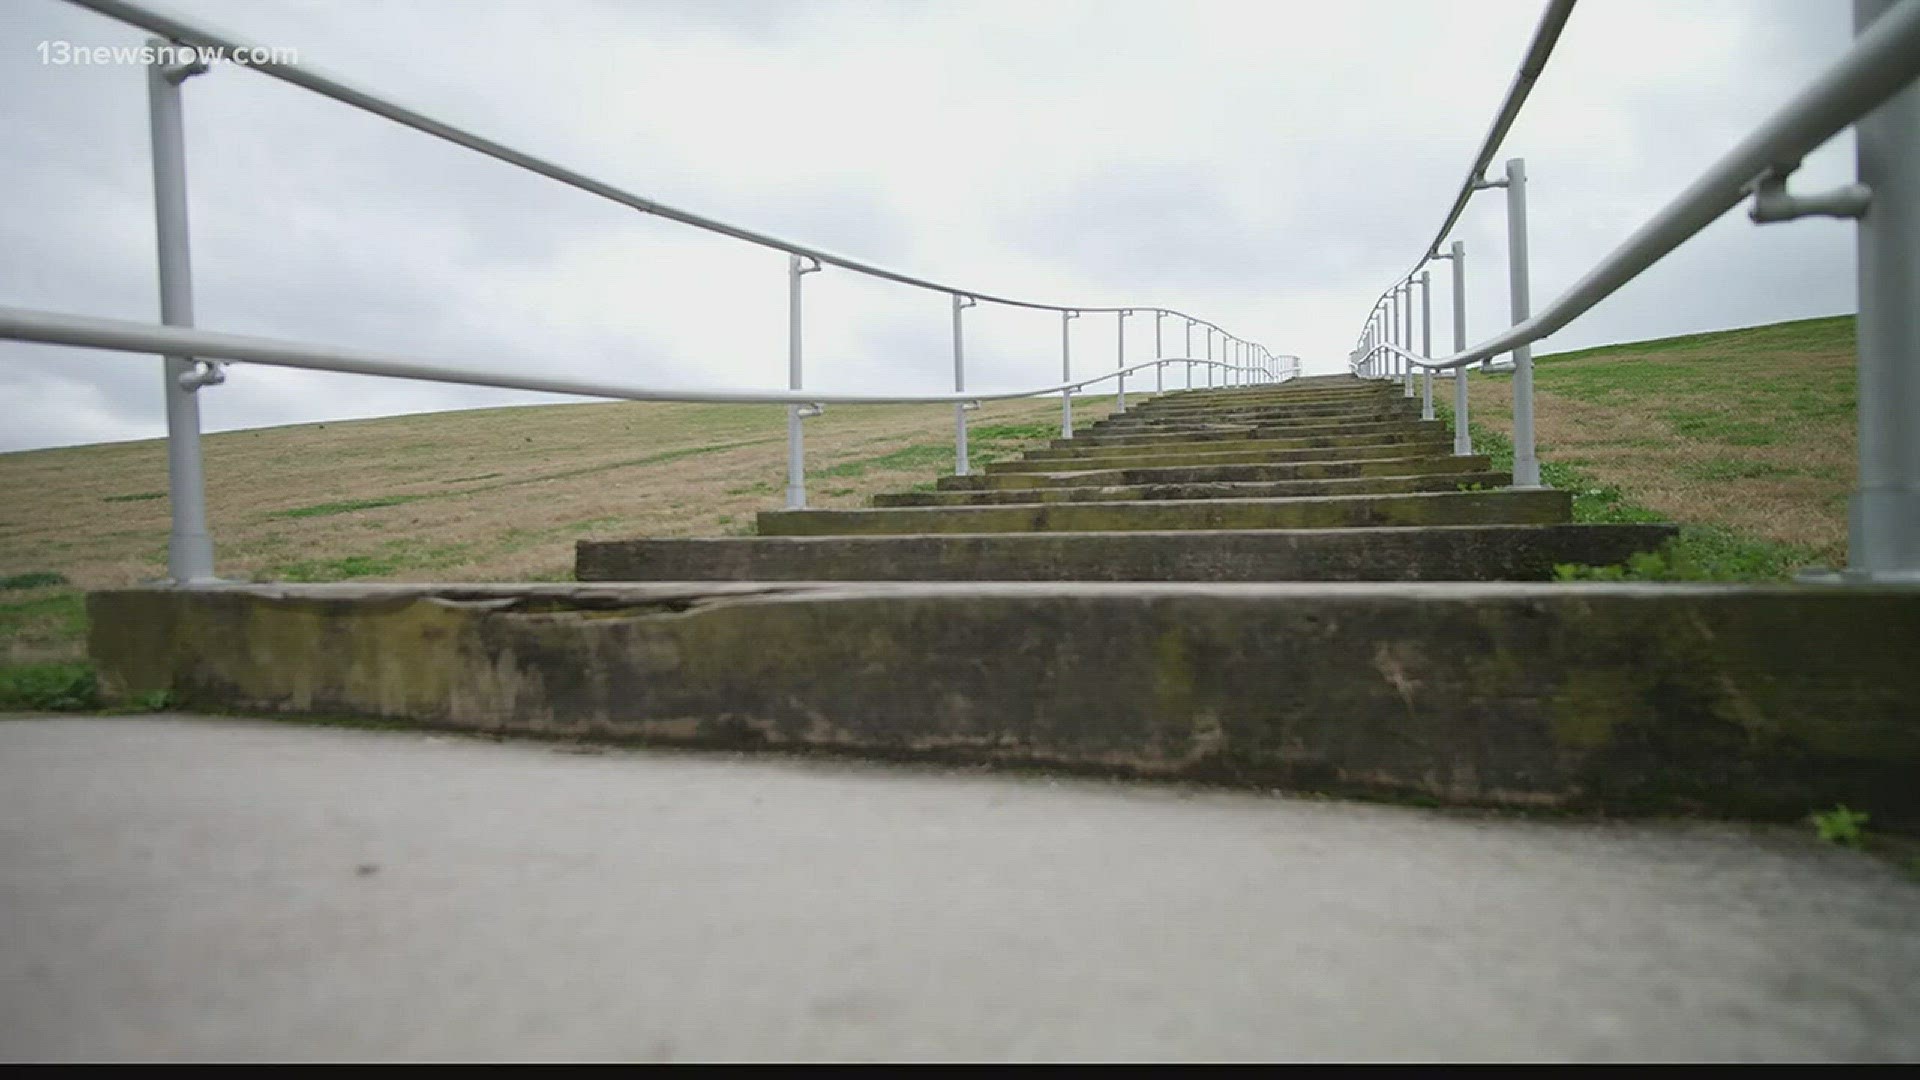 The City is looking for an artist to breathe new life into the iconic staircase on Mount Trashmore